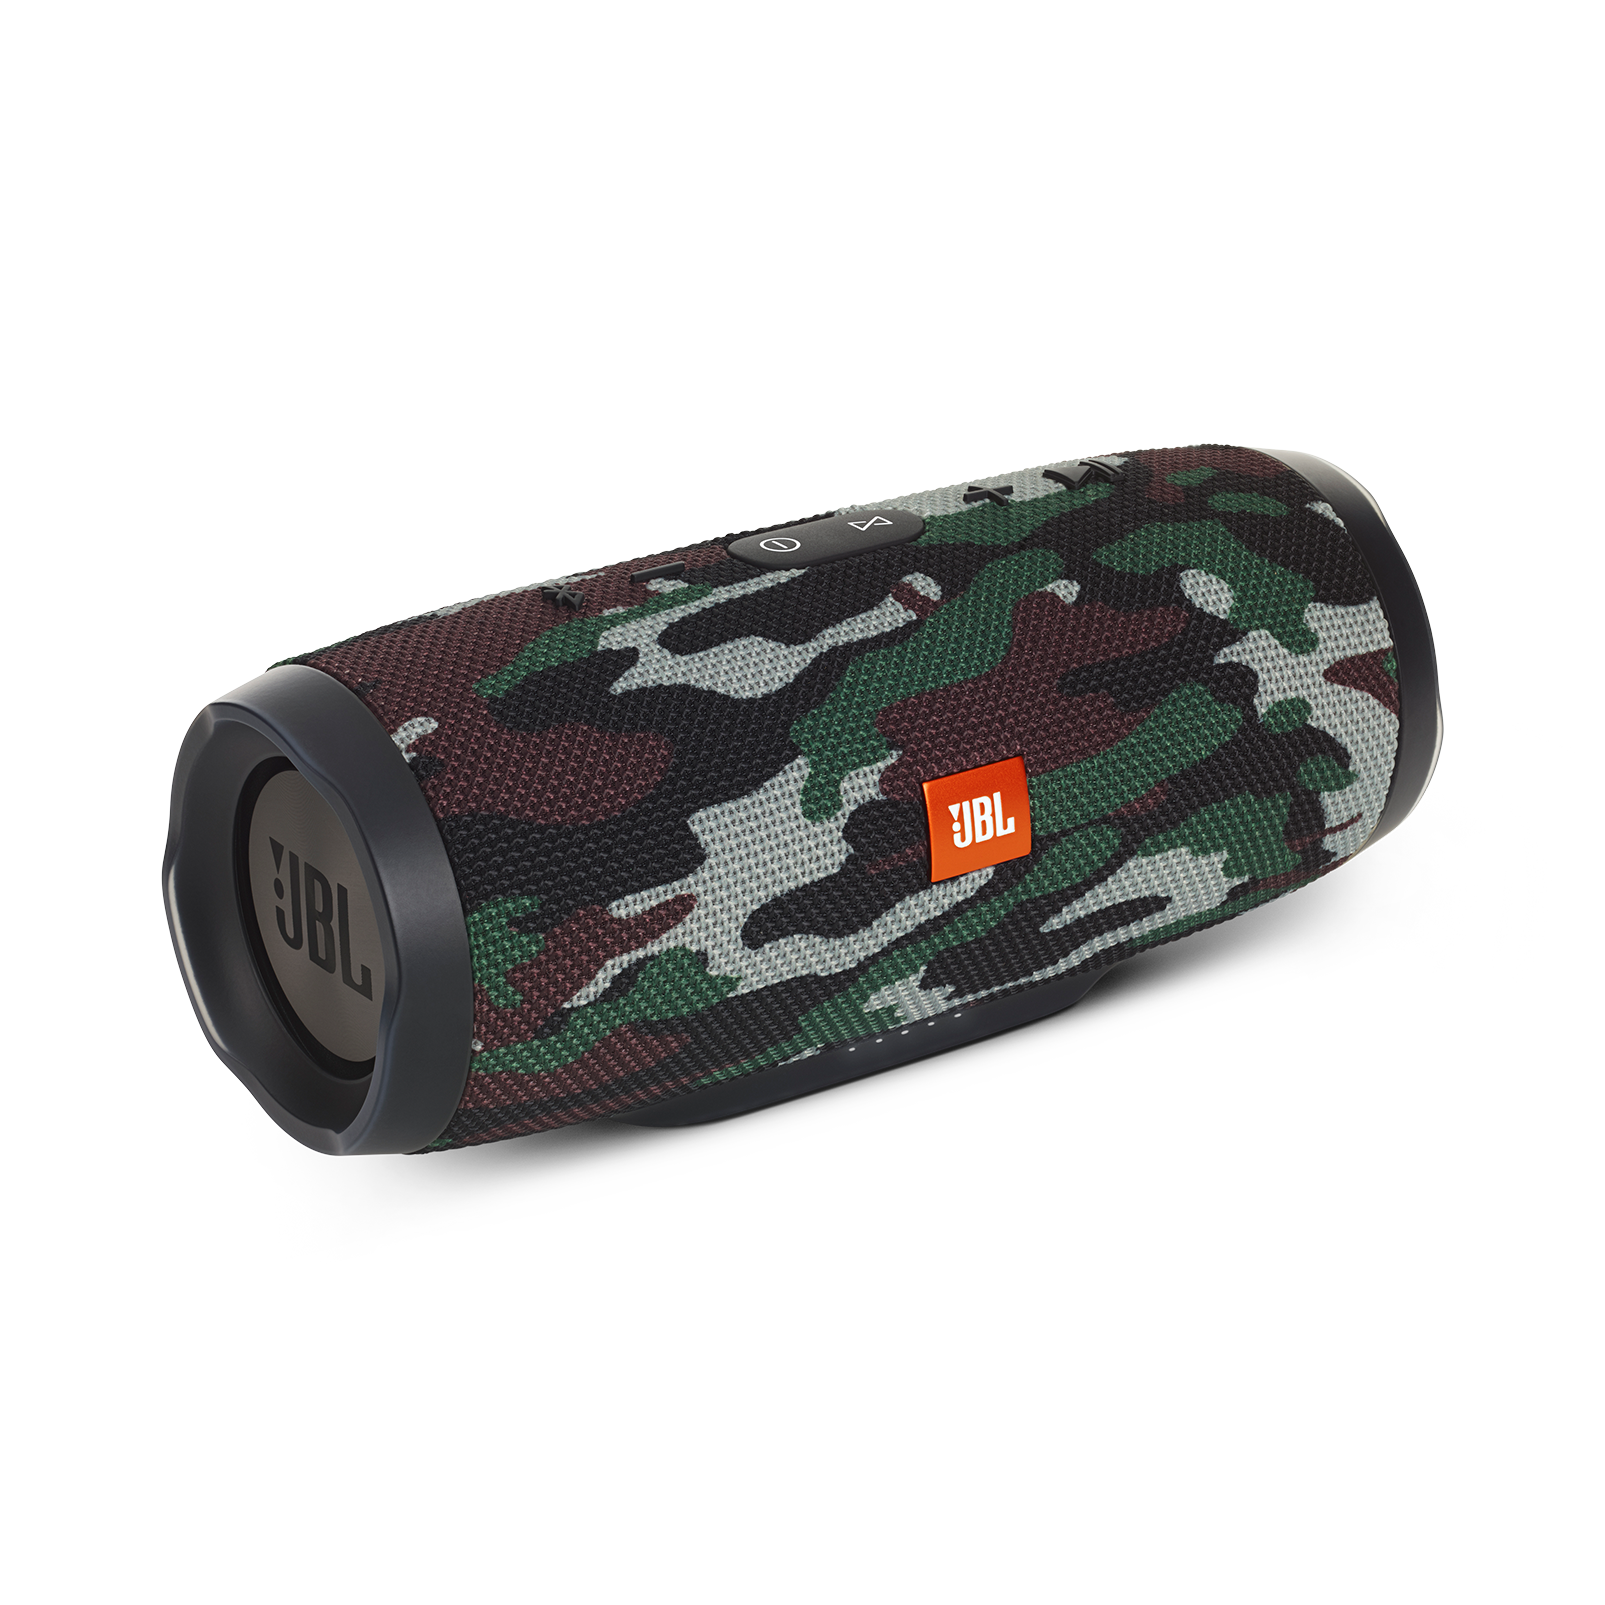 arsenal Lover Downtown JBL Charge3 Portable Wireless Speaker - Camouflage (Special Edition)